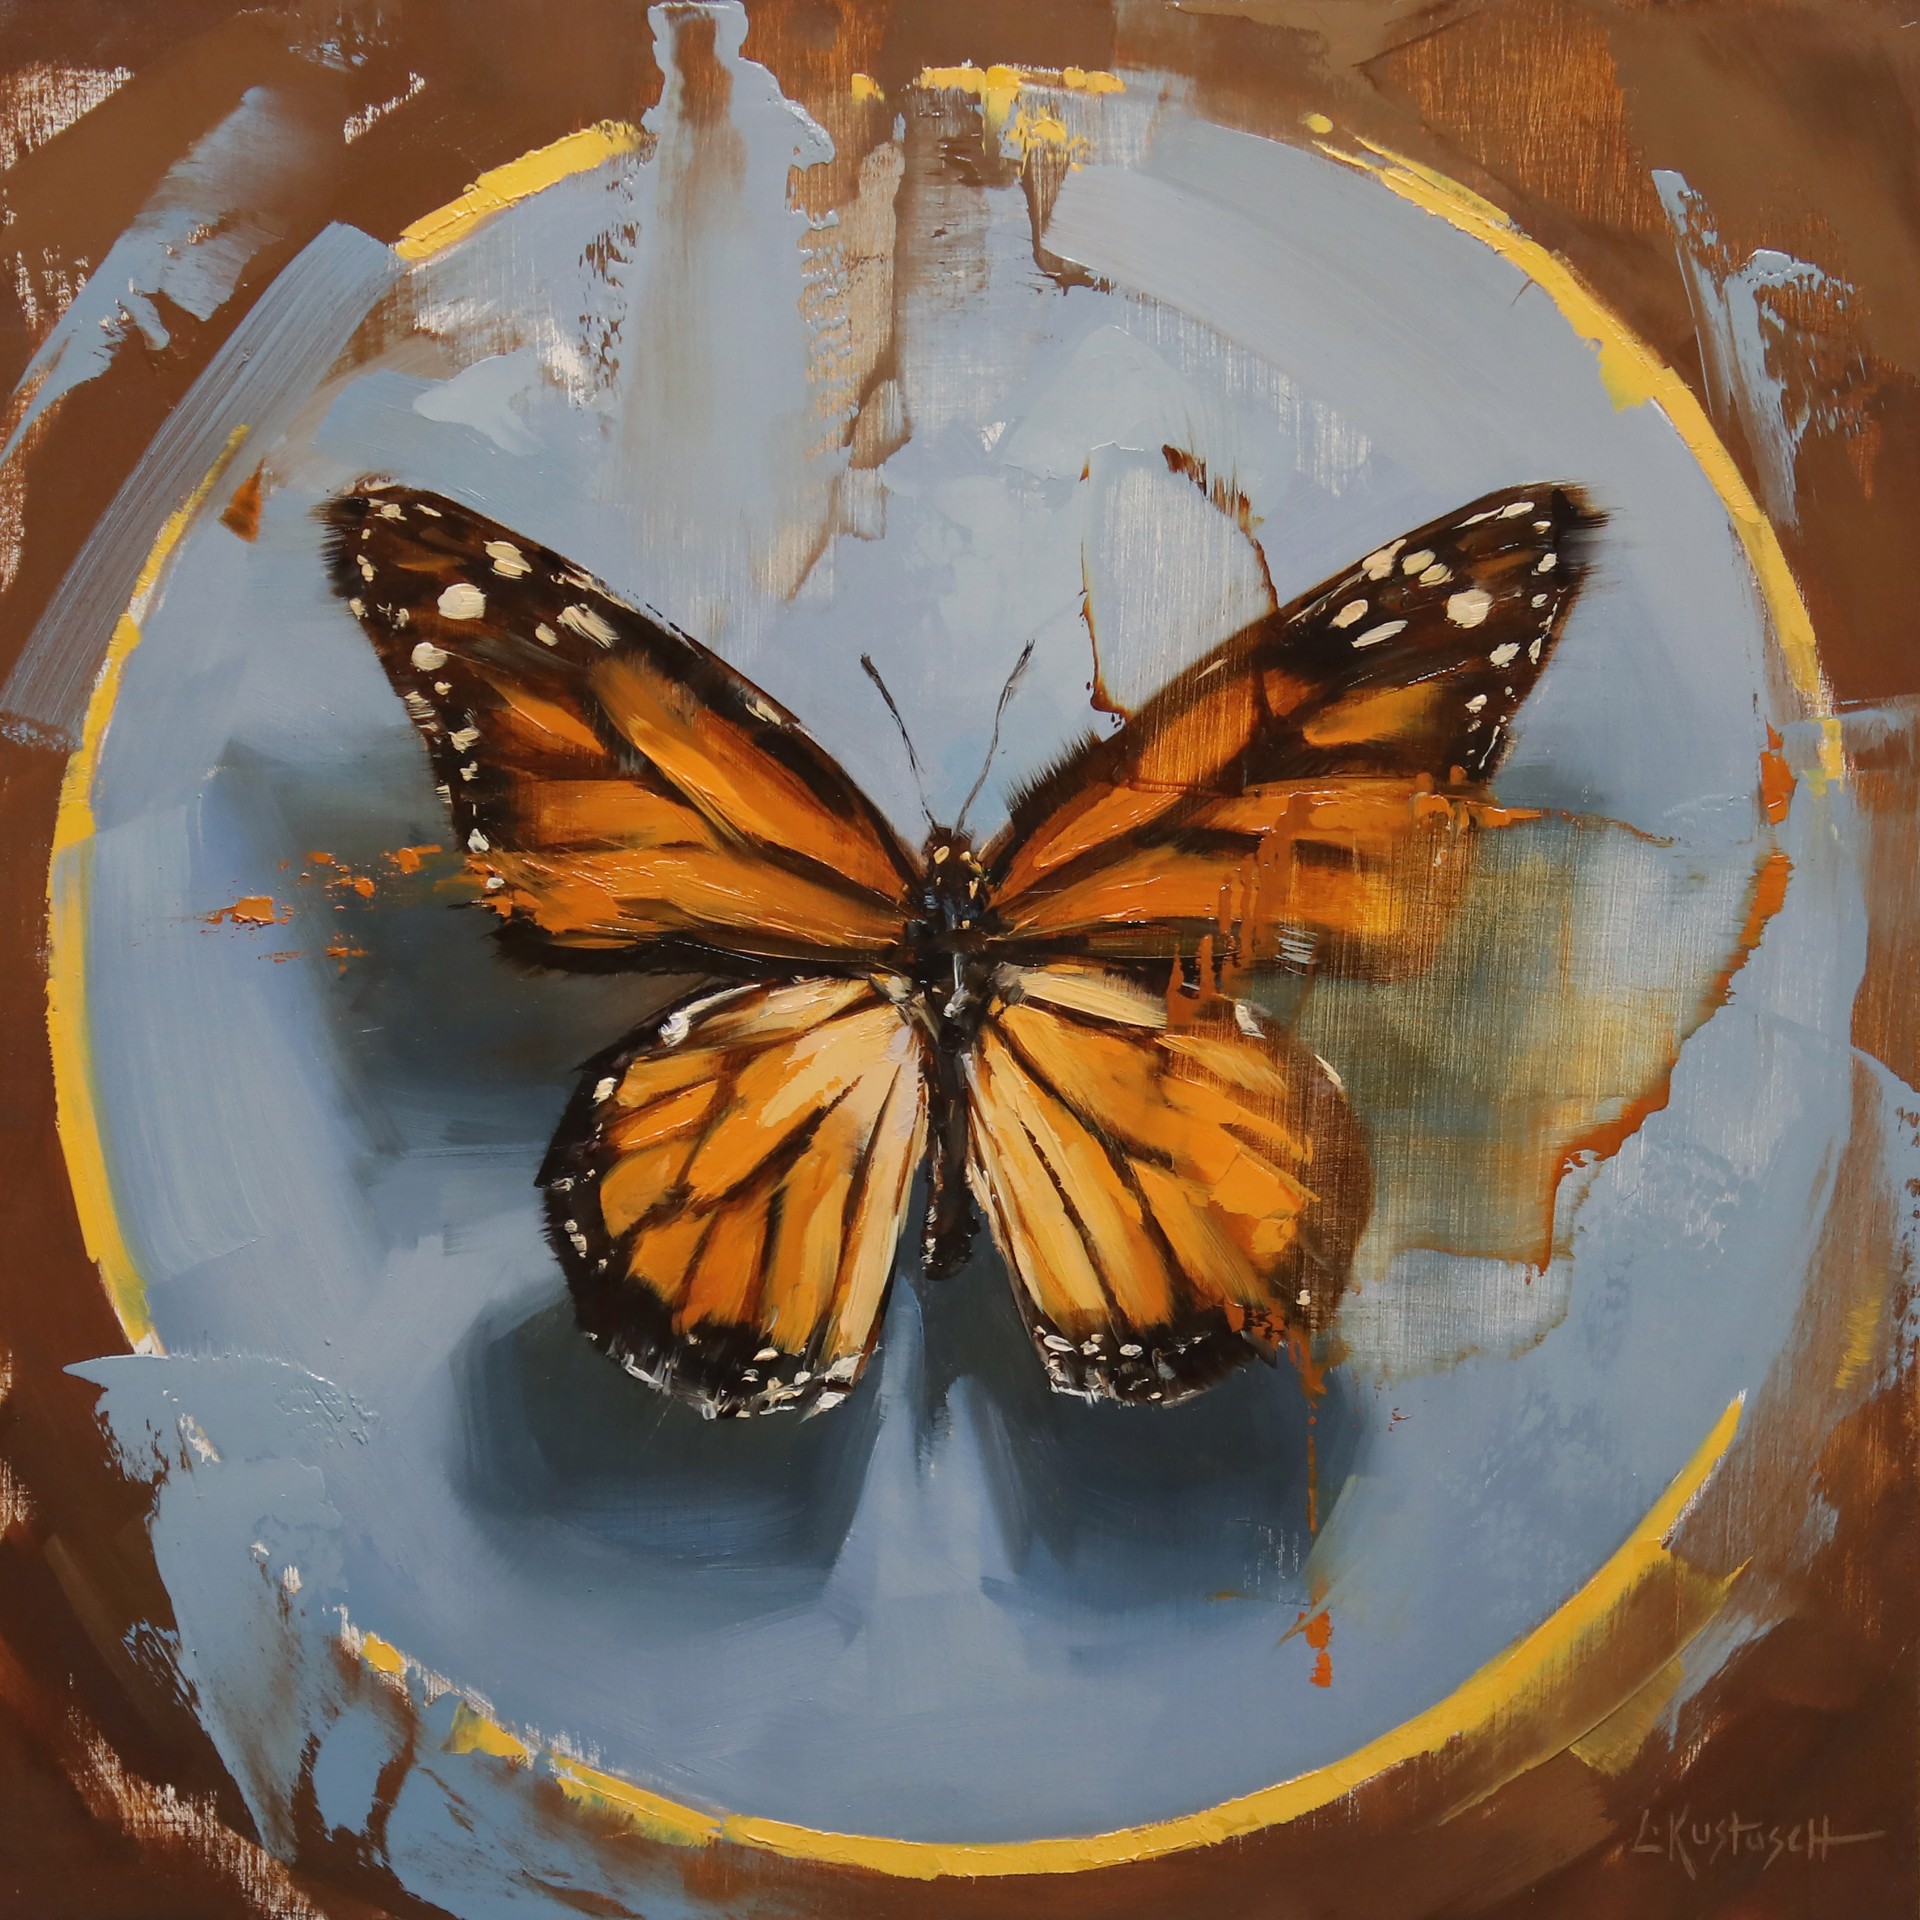 The Monarch Butterfly by Lindsey Kustusch